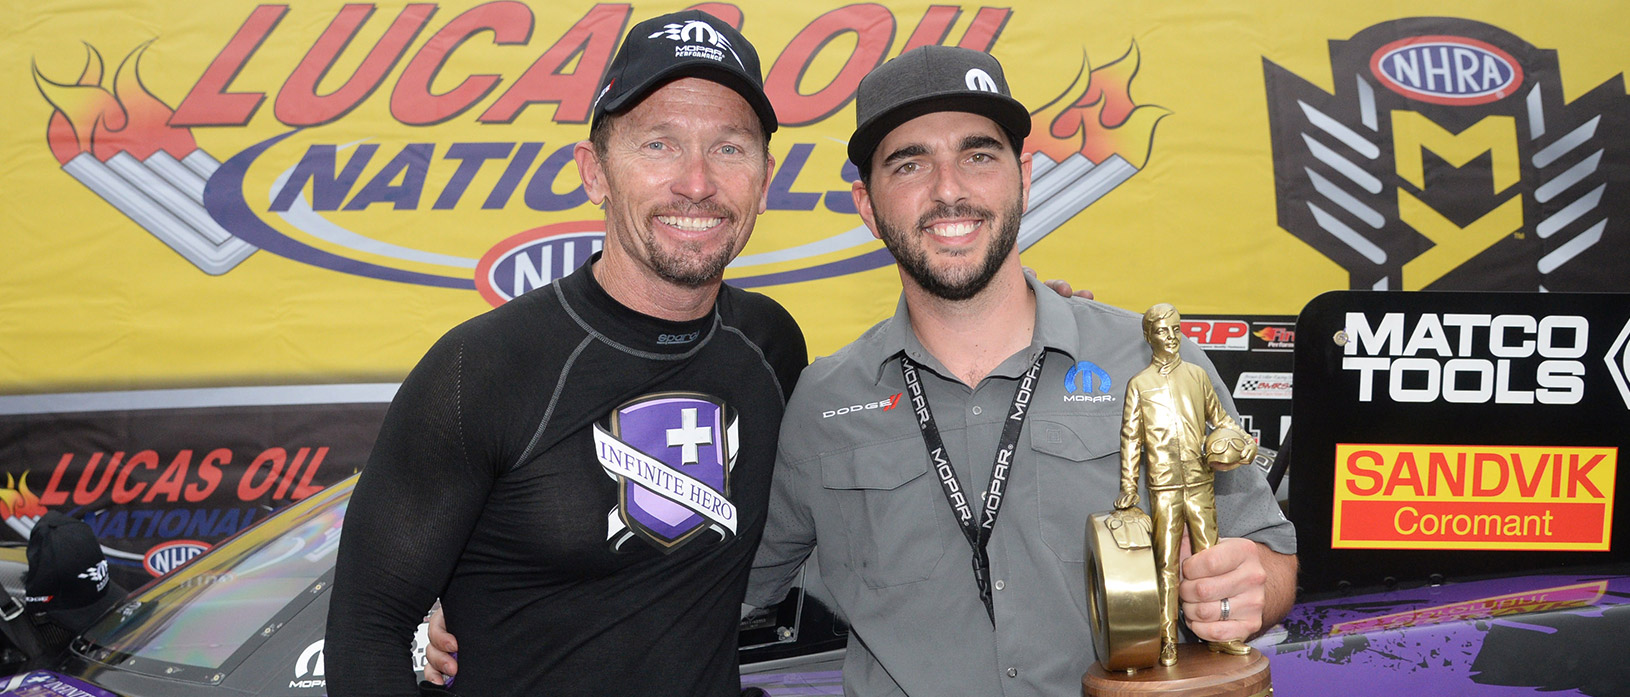 Man posing with racecar and friend after wining Lucas oil nationals